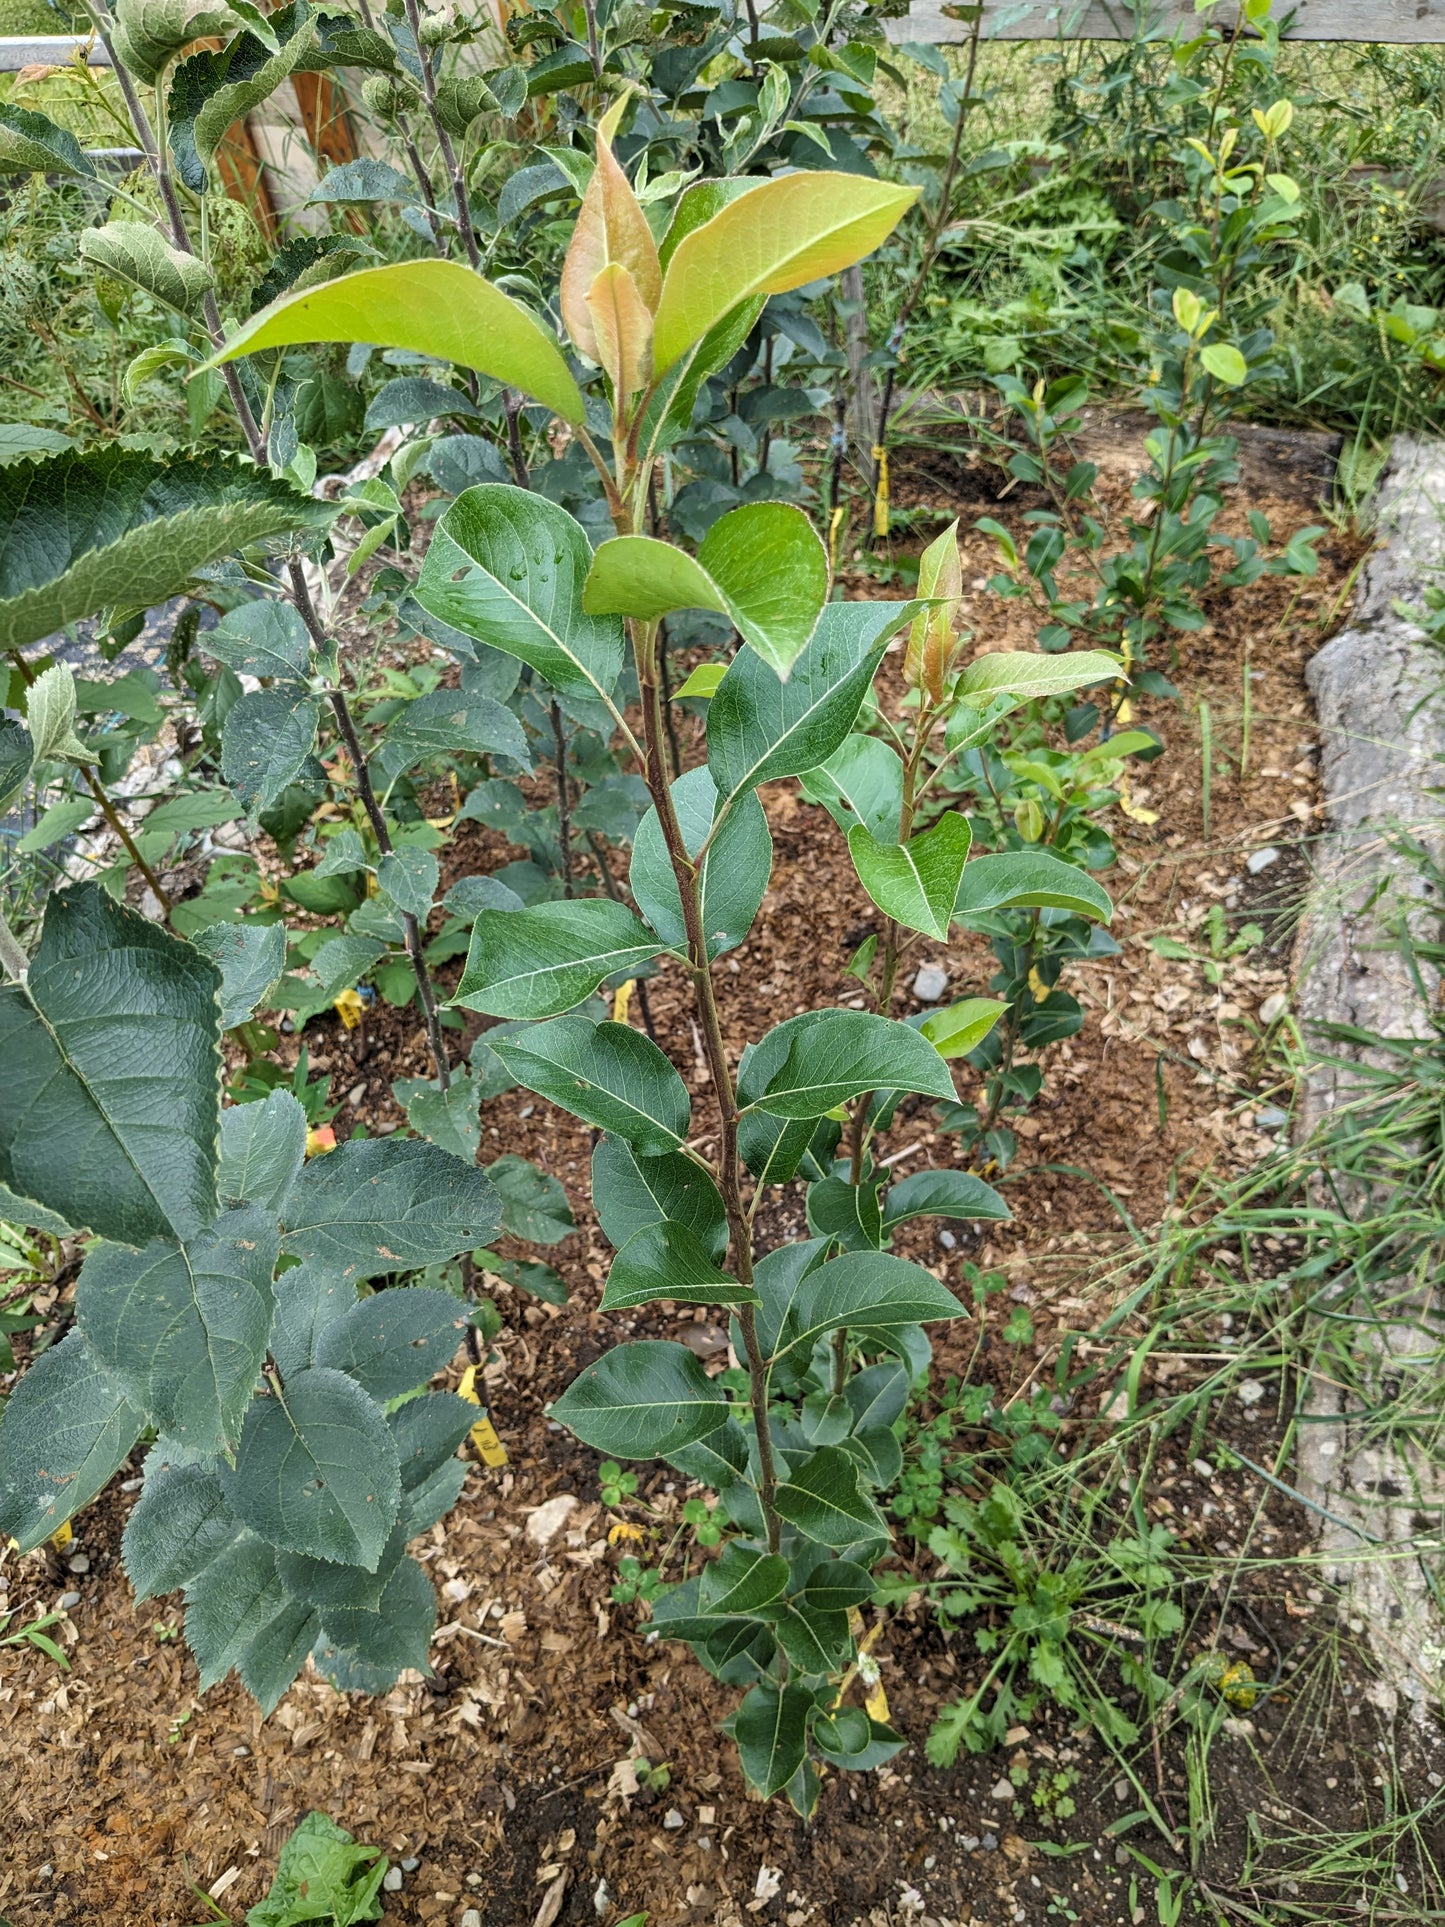 Grafted European pear trees